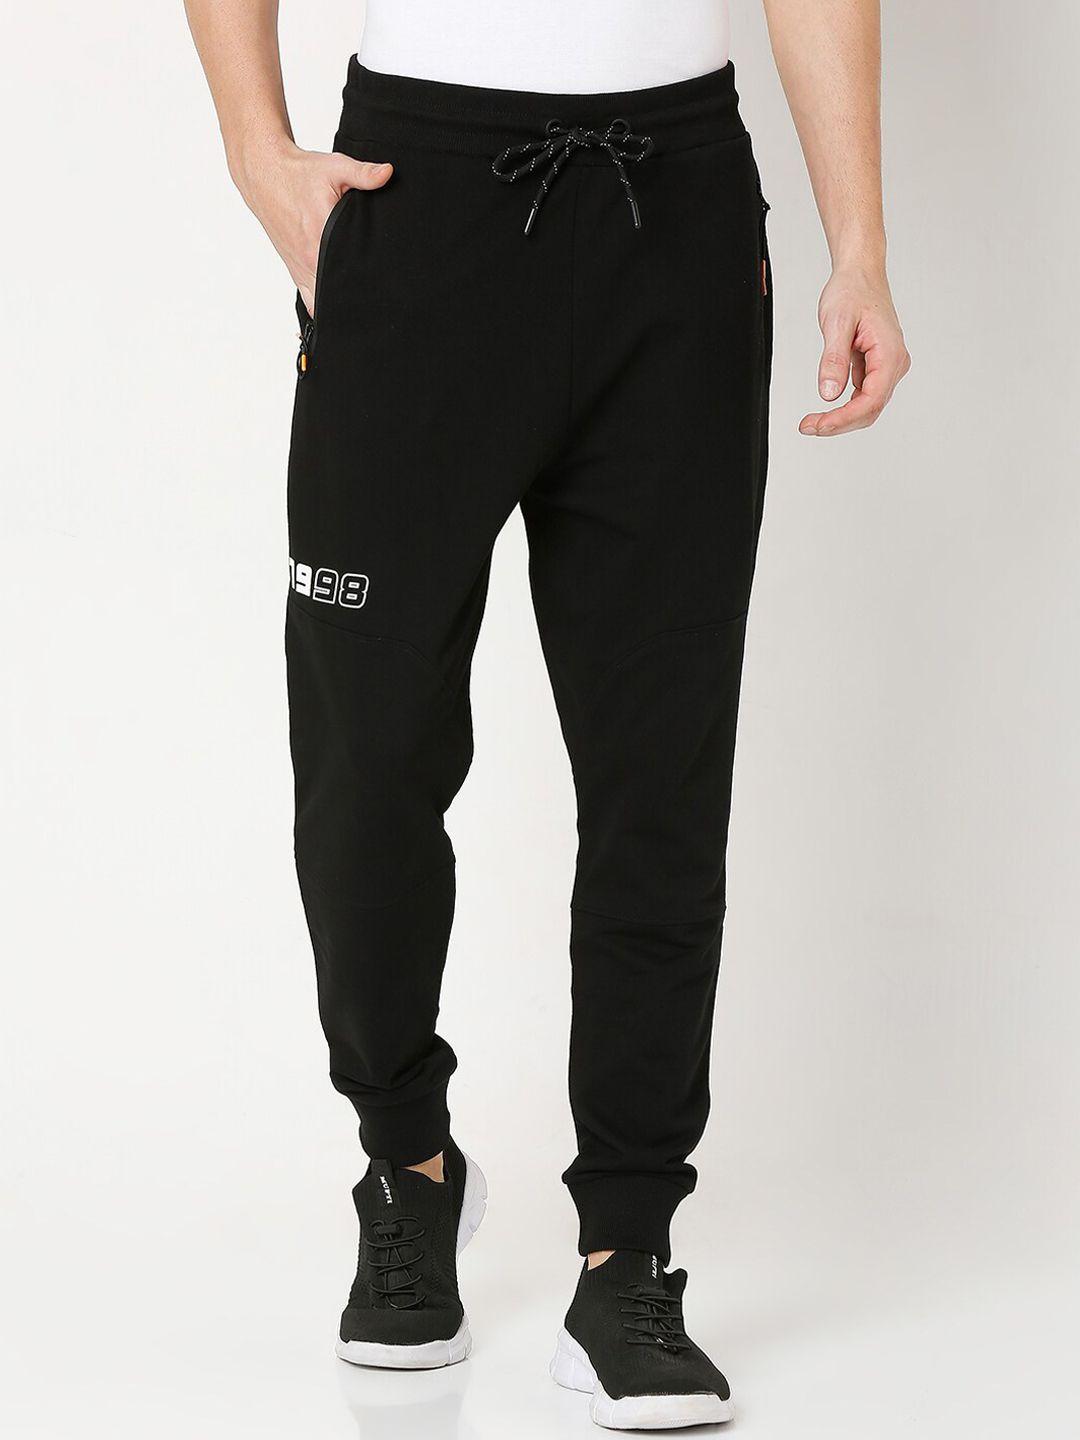 mufti men black loose fit joggers trousers